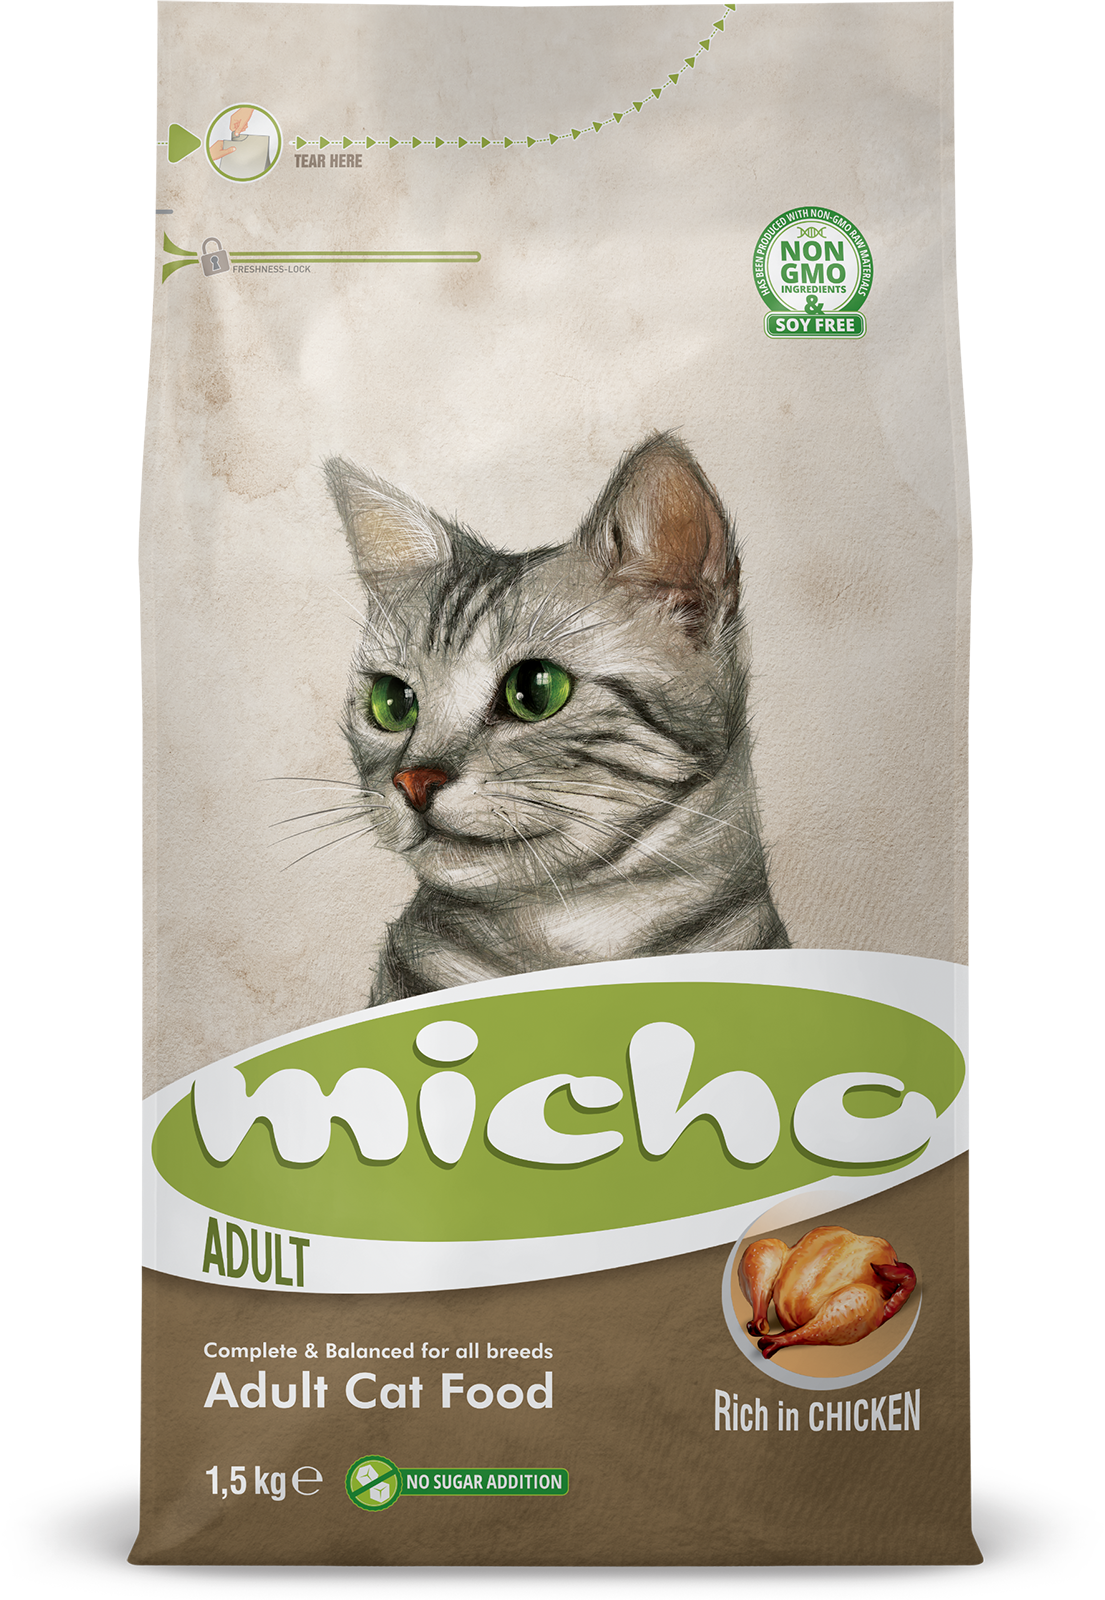 Micho Adult Cat is formulated by professional pet food nutritionists and is produced by extruder technology to maximise its quality. This gentle cooking process ensures that your cat’s obtains all the nutrients that it needs every day from the food. Micho Adult Cat contains carefully selected ingredients, with an optimum balance of nutritional value, and particular attention has been paid to ingredients that support renal health and provide optimal digestion.